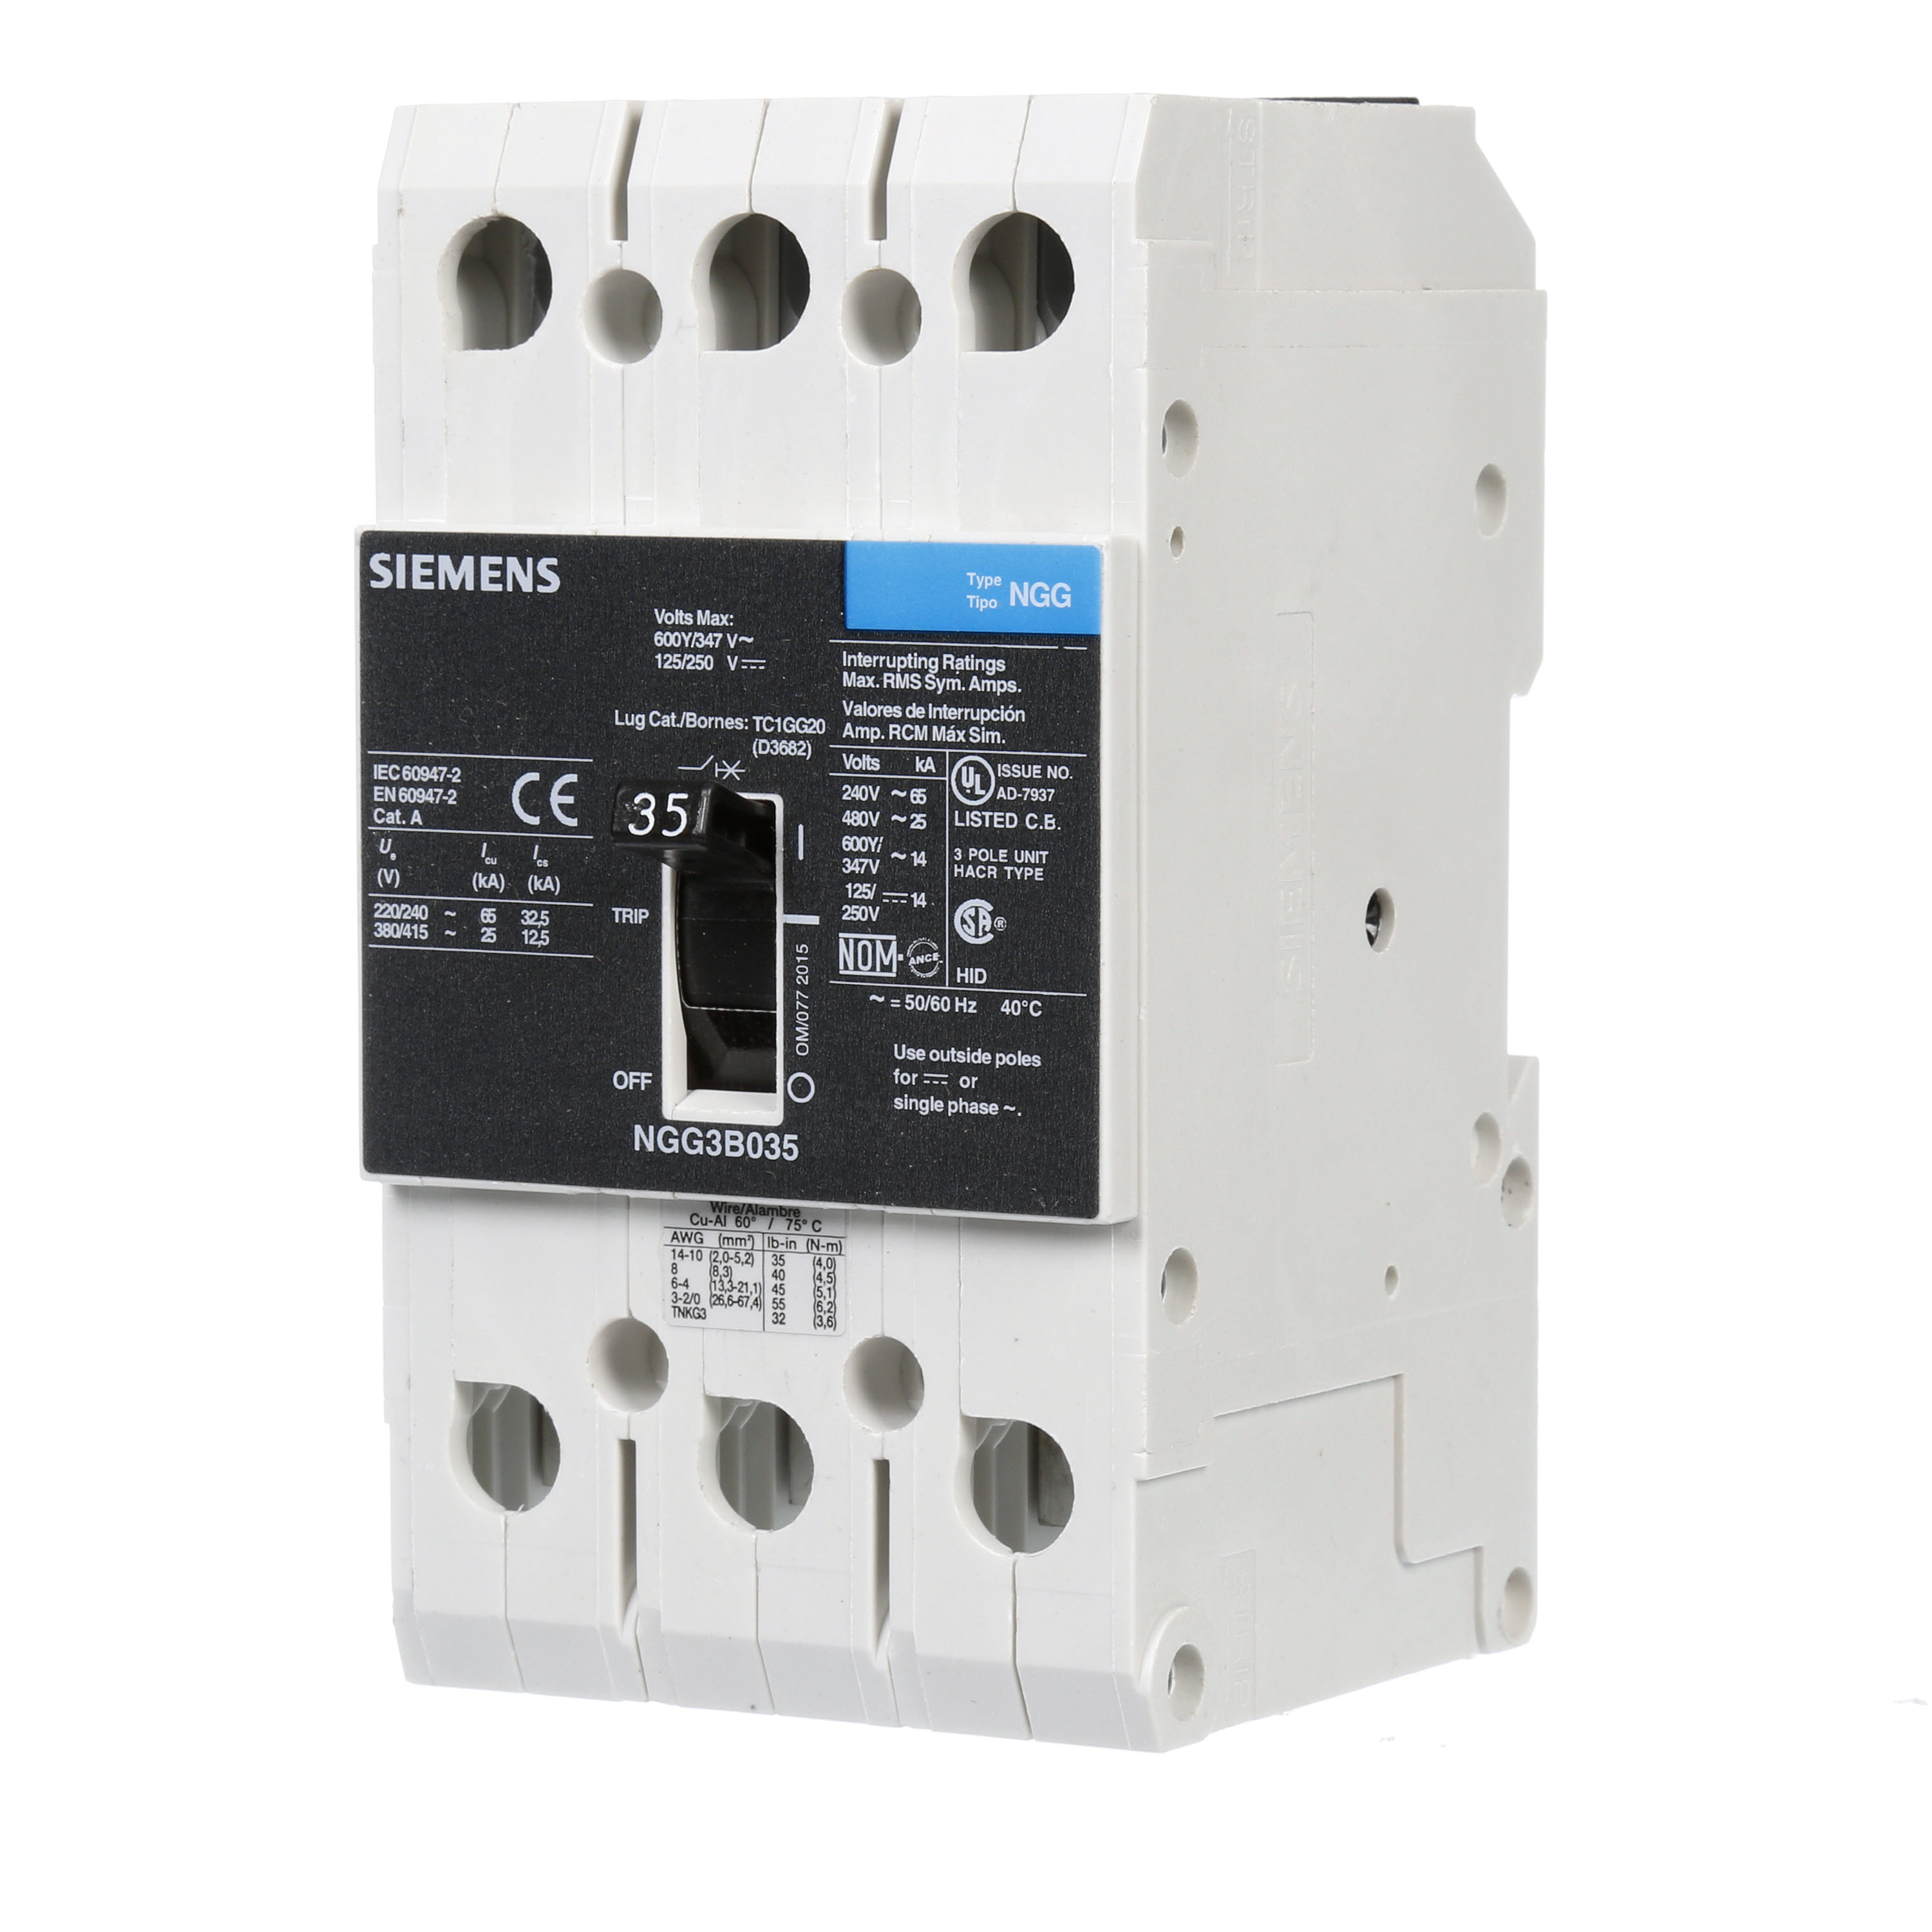 SIEMENS LOW VOLTAGE G FRAME CIRCUIT BREAKER WITH THERMAL - MAGNETIC TRIP. UL LISTED NGG FRAME WITH STANDARD BREAKING CAPACITY. 35A 3-POLE (14KAIC AT 600Y/347V)(25KAIC AT 480V). SPECIAL FEATURES MOUNTS ON DIN RAIL / SCREW, LINE AND LOAD SIDE LUGS (TC1GG20) WIRE RANGE 8 - 1/0 AWS (CU/AL). DIMENSIONS (W x H x D) IN 3 x 5.4 x 2.8.